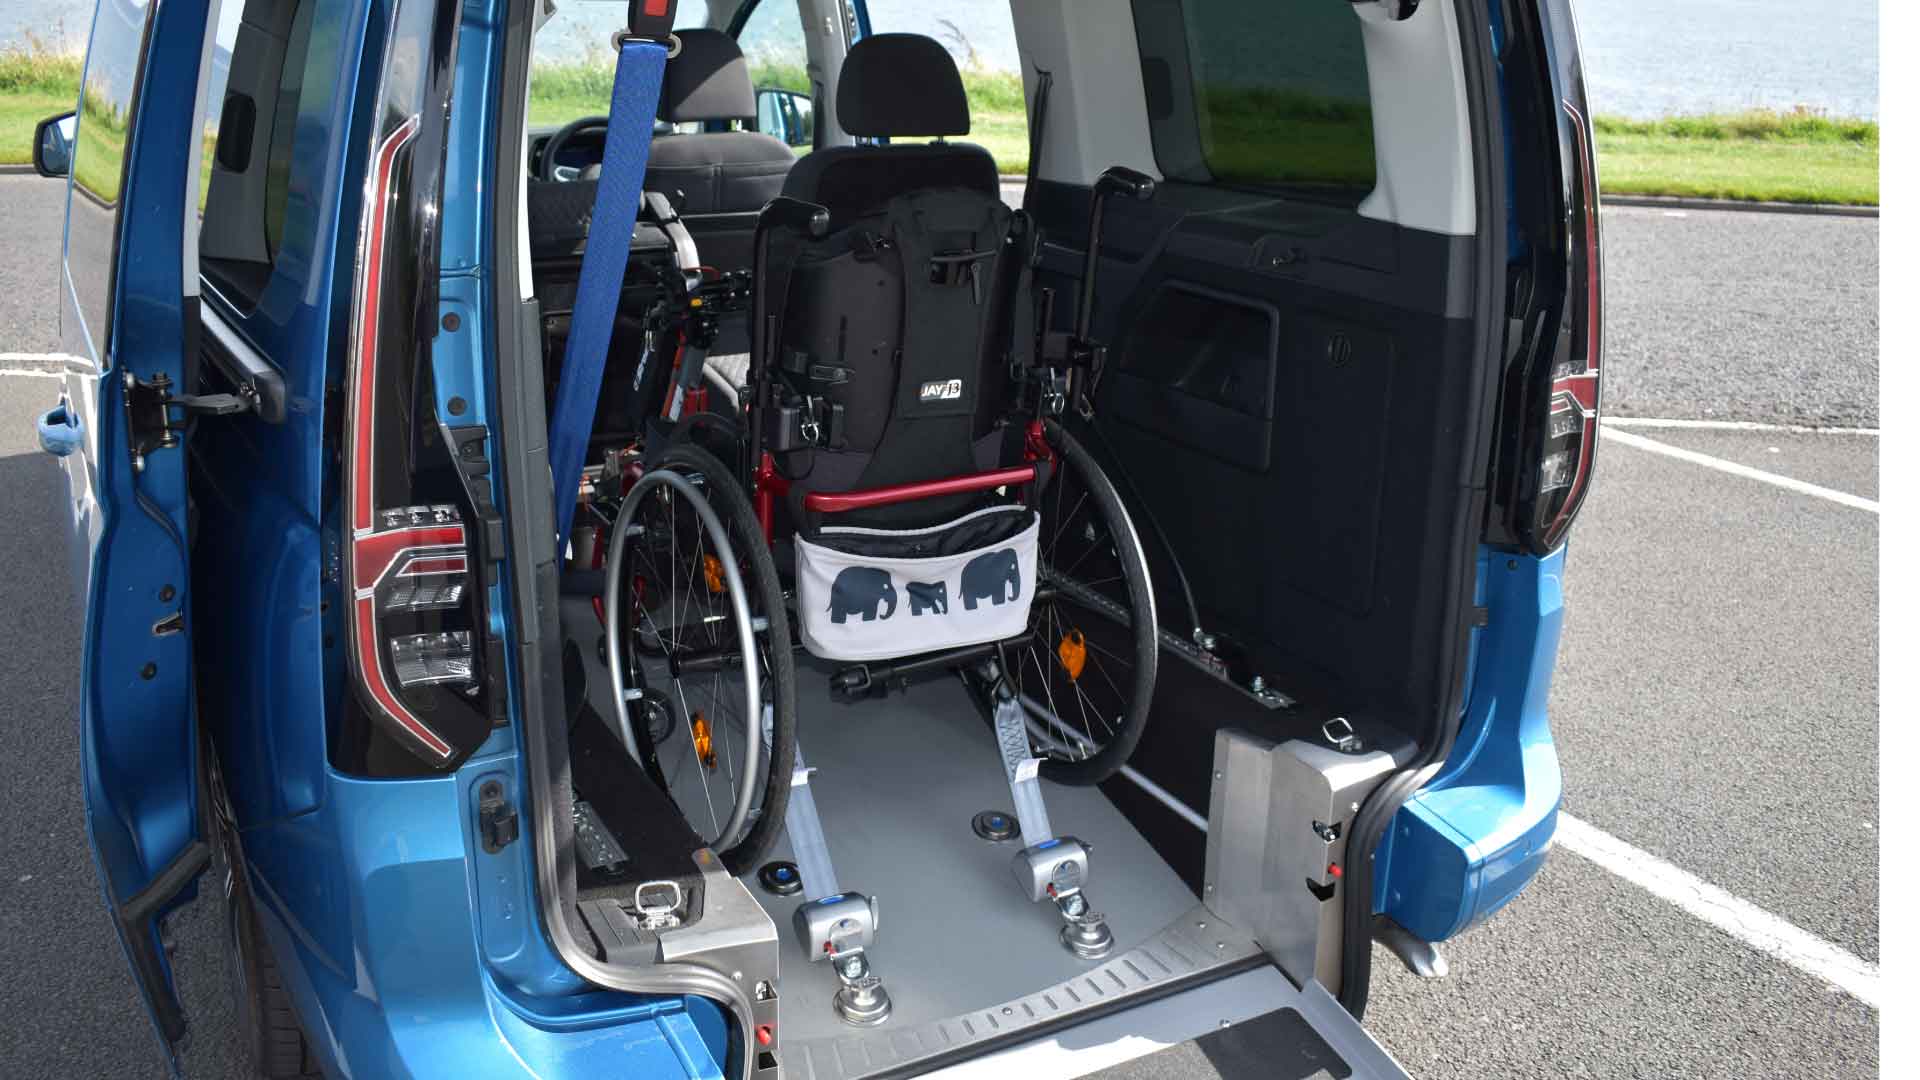 Lewis Reed Group | British Supplier of Wheelchair Accessible Vehicles | Volkswagen Cady Maxi 5 with wheelchair in place